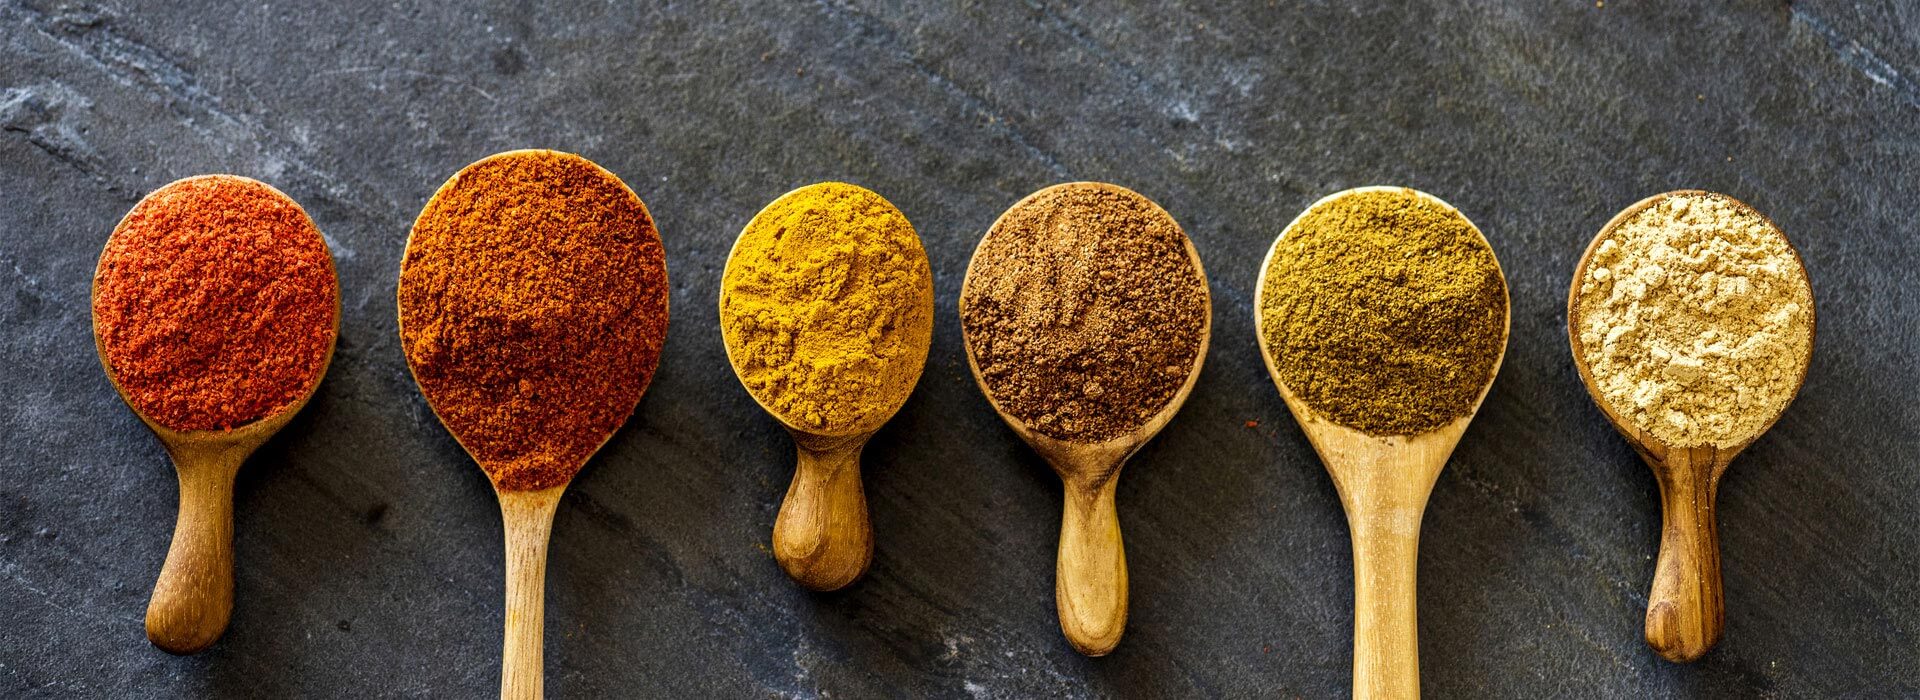 Savor the Flavors of India: Spice up your life with our authentic blends